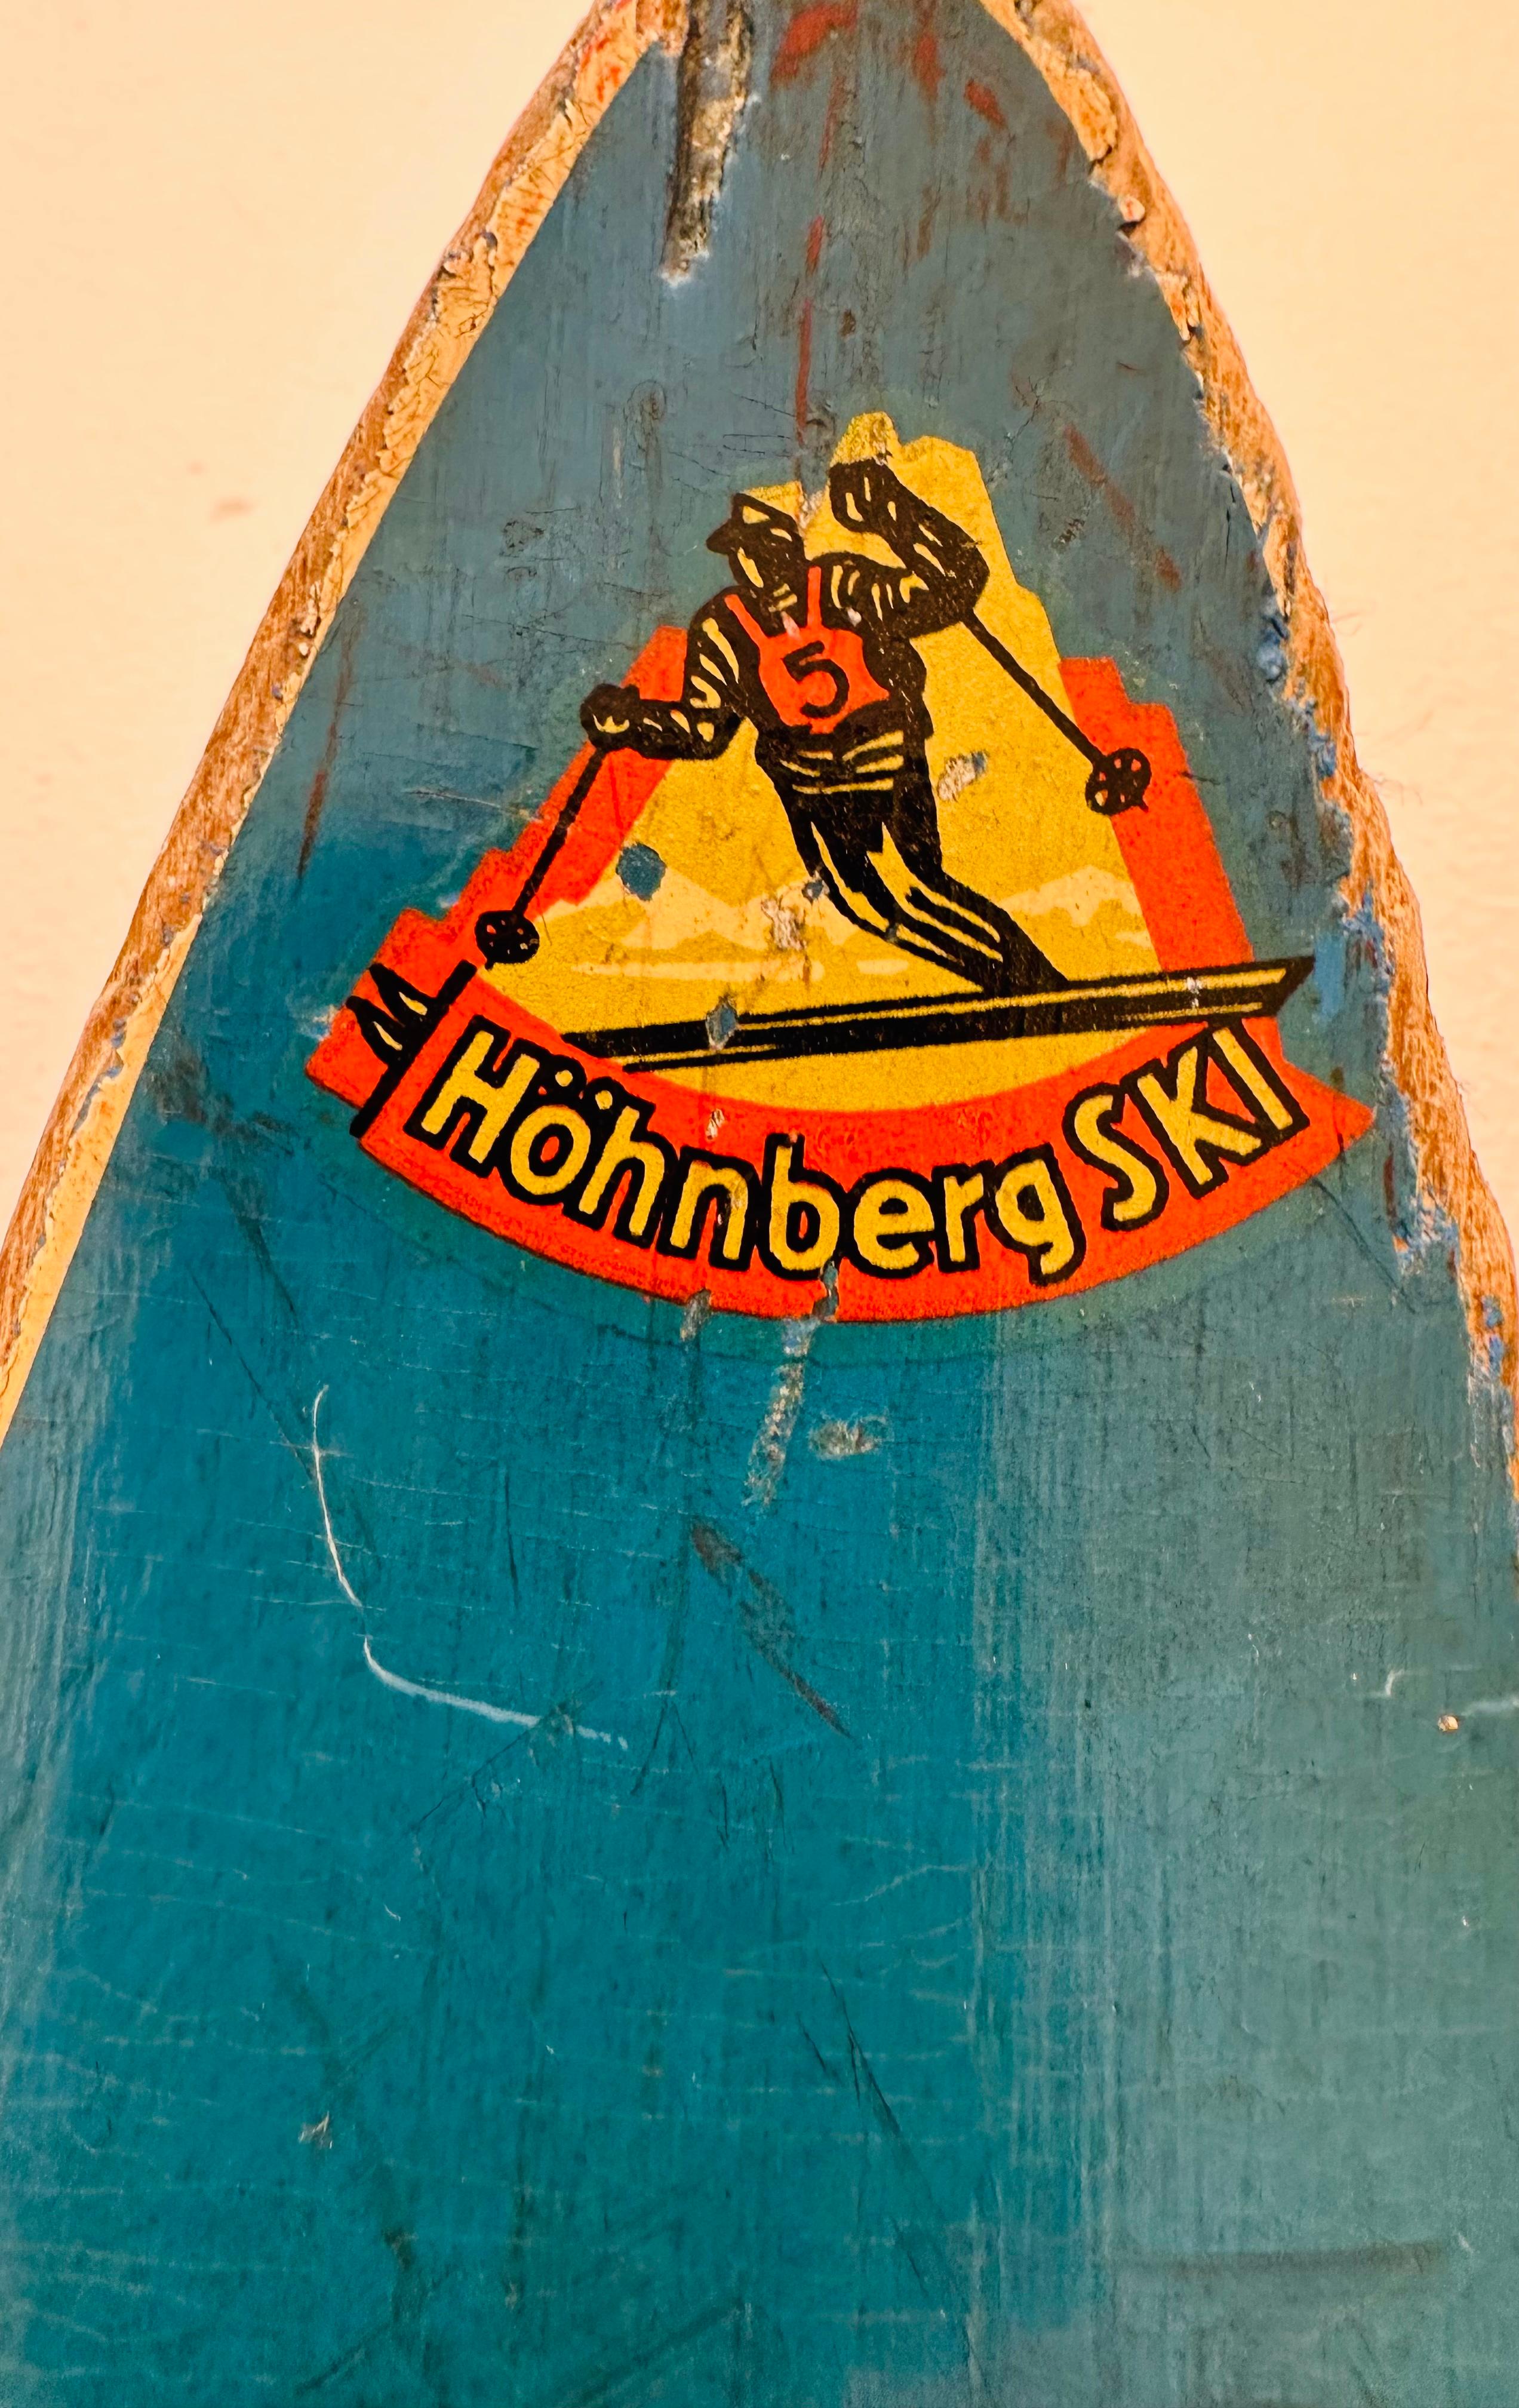 Vintage Circa 1950s Wooden Skis with Bindings by Spezial Schichten Hohnberg For Sale 2